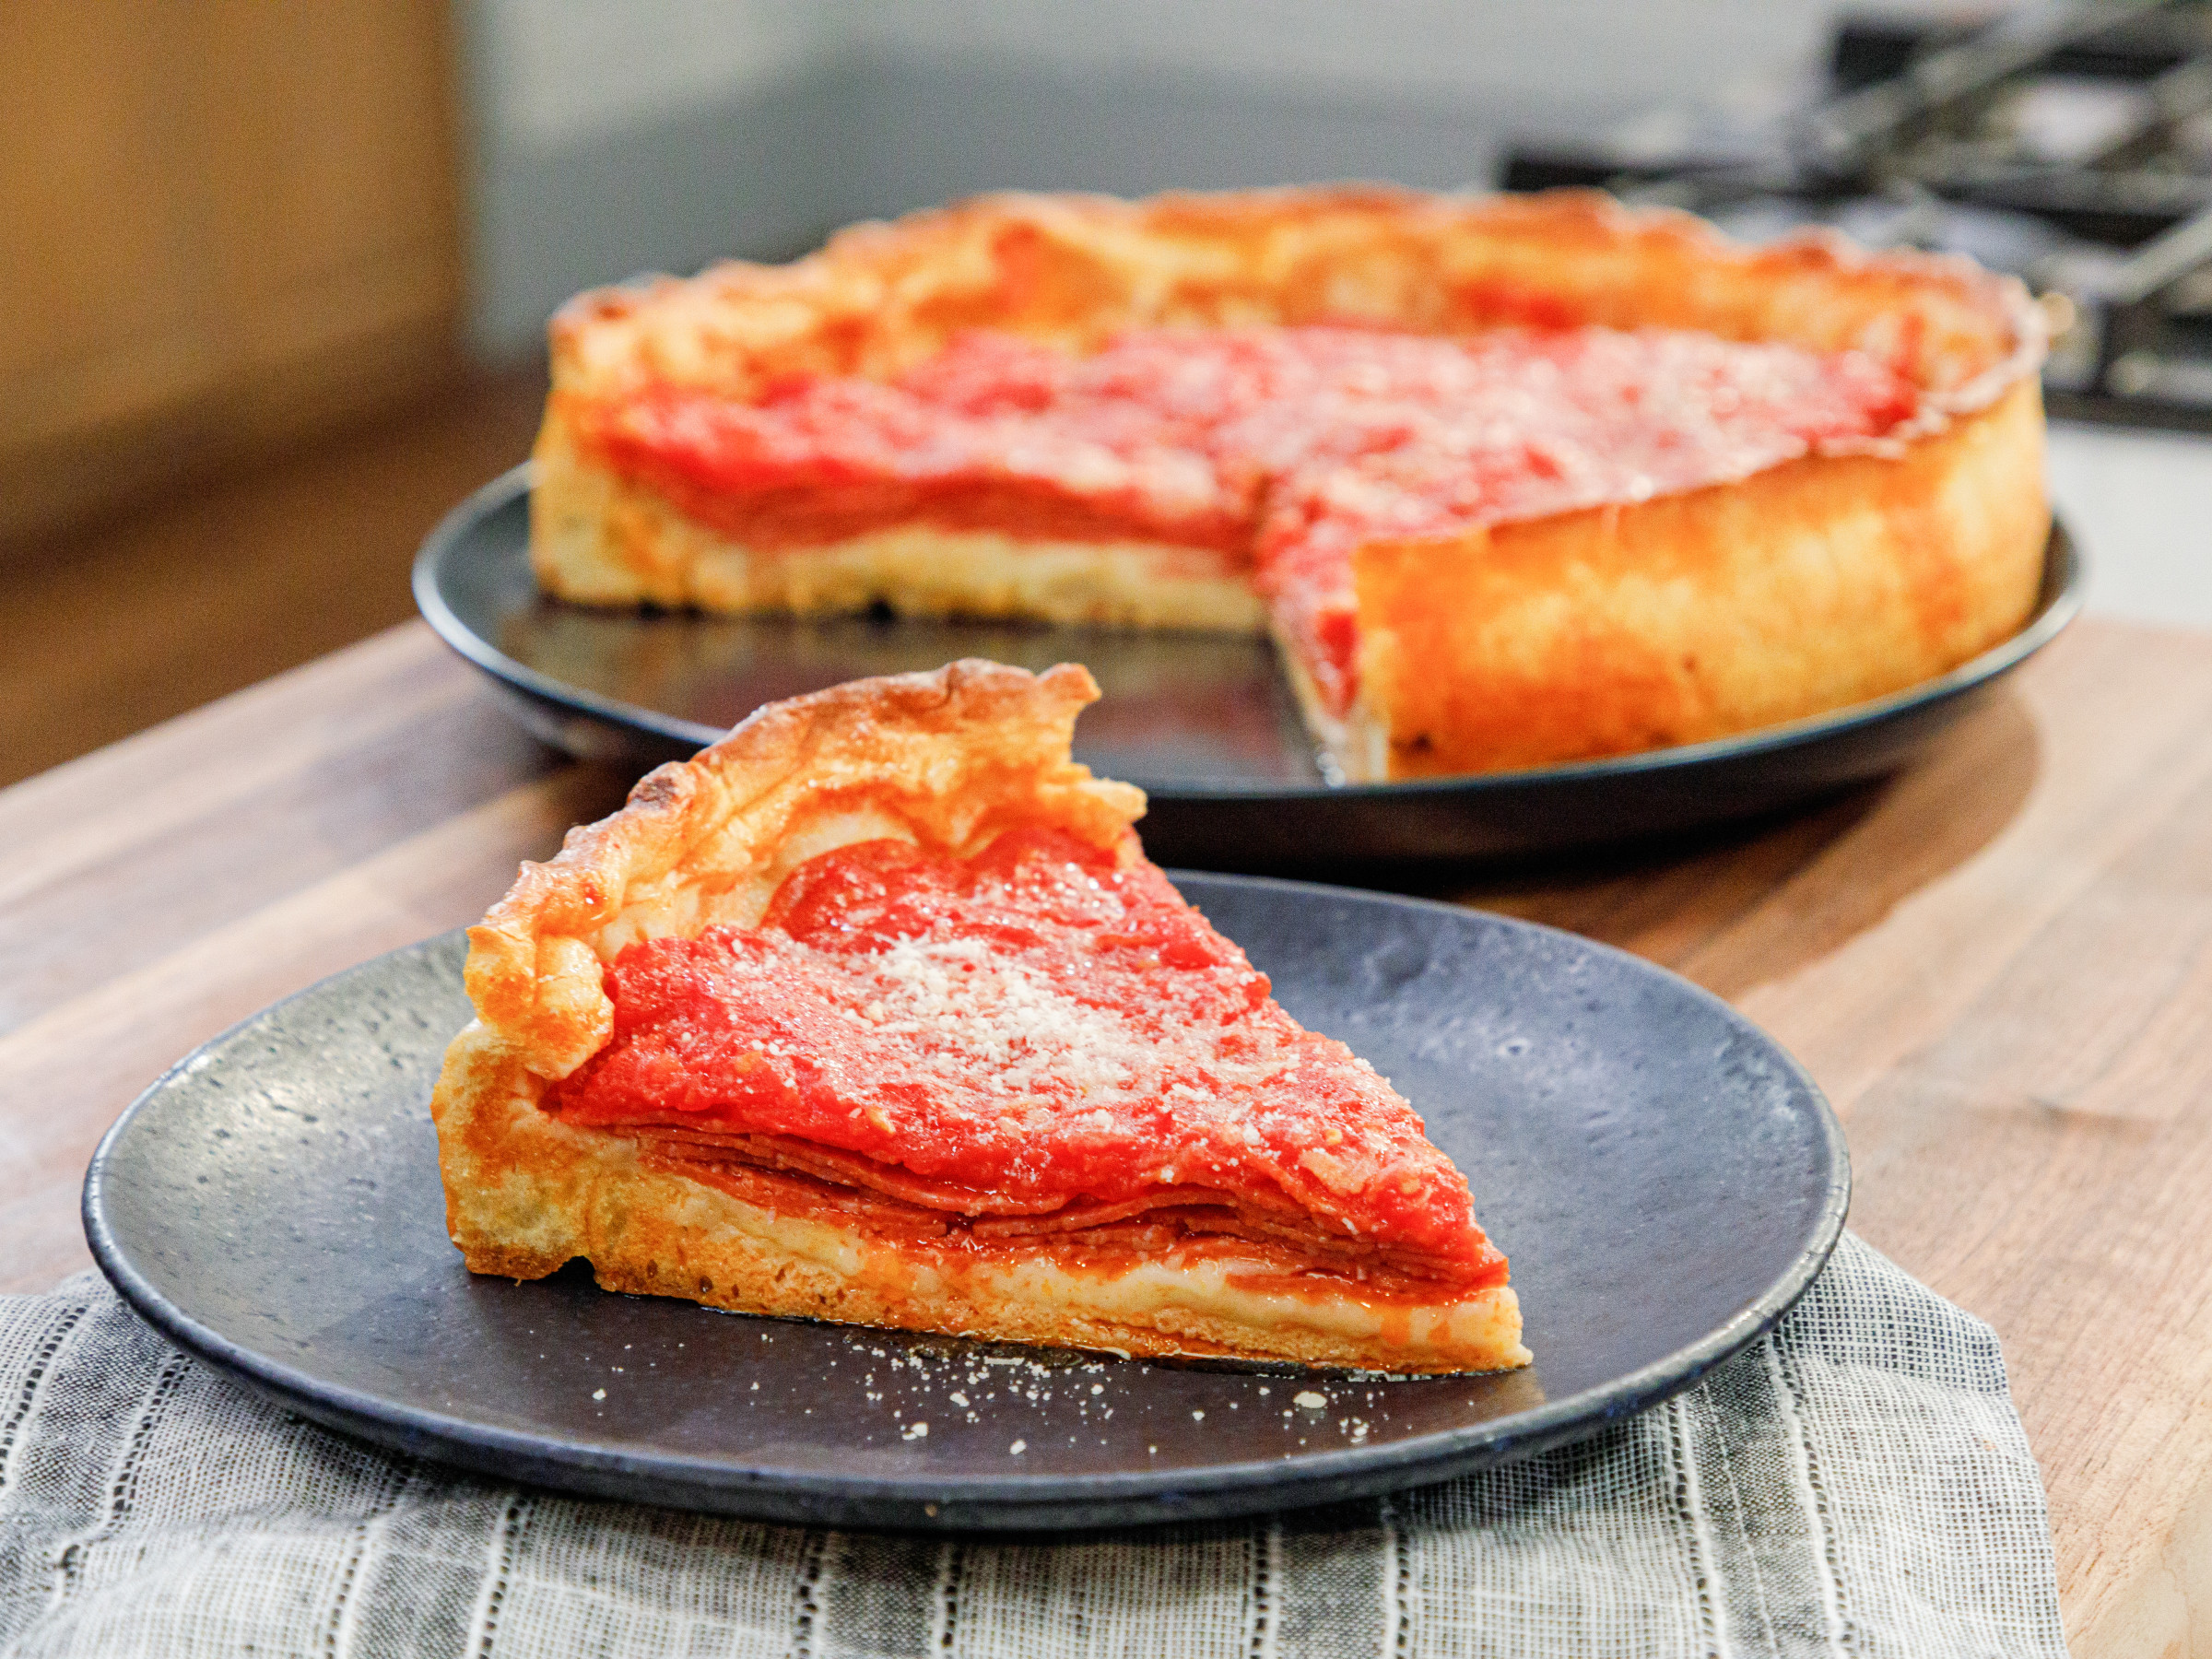 Chicago-style Deep-dish Pizza